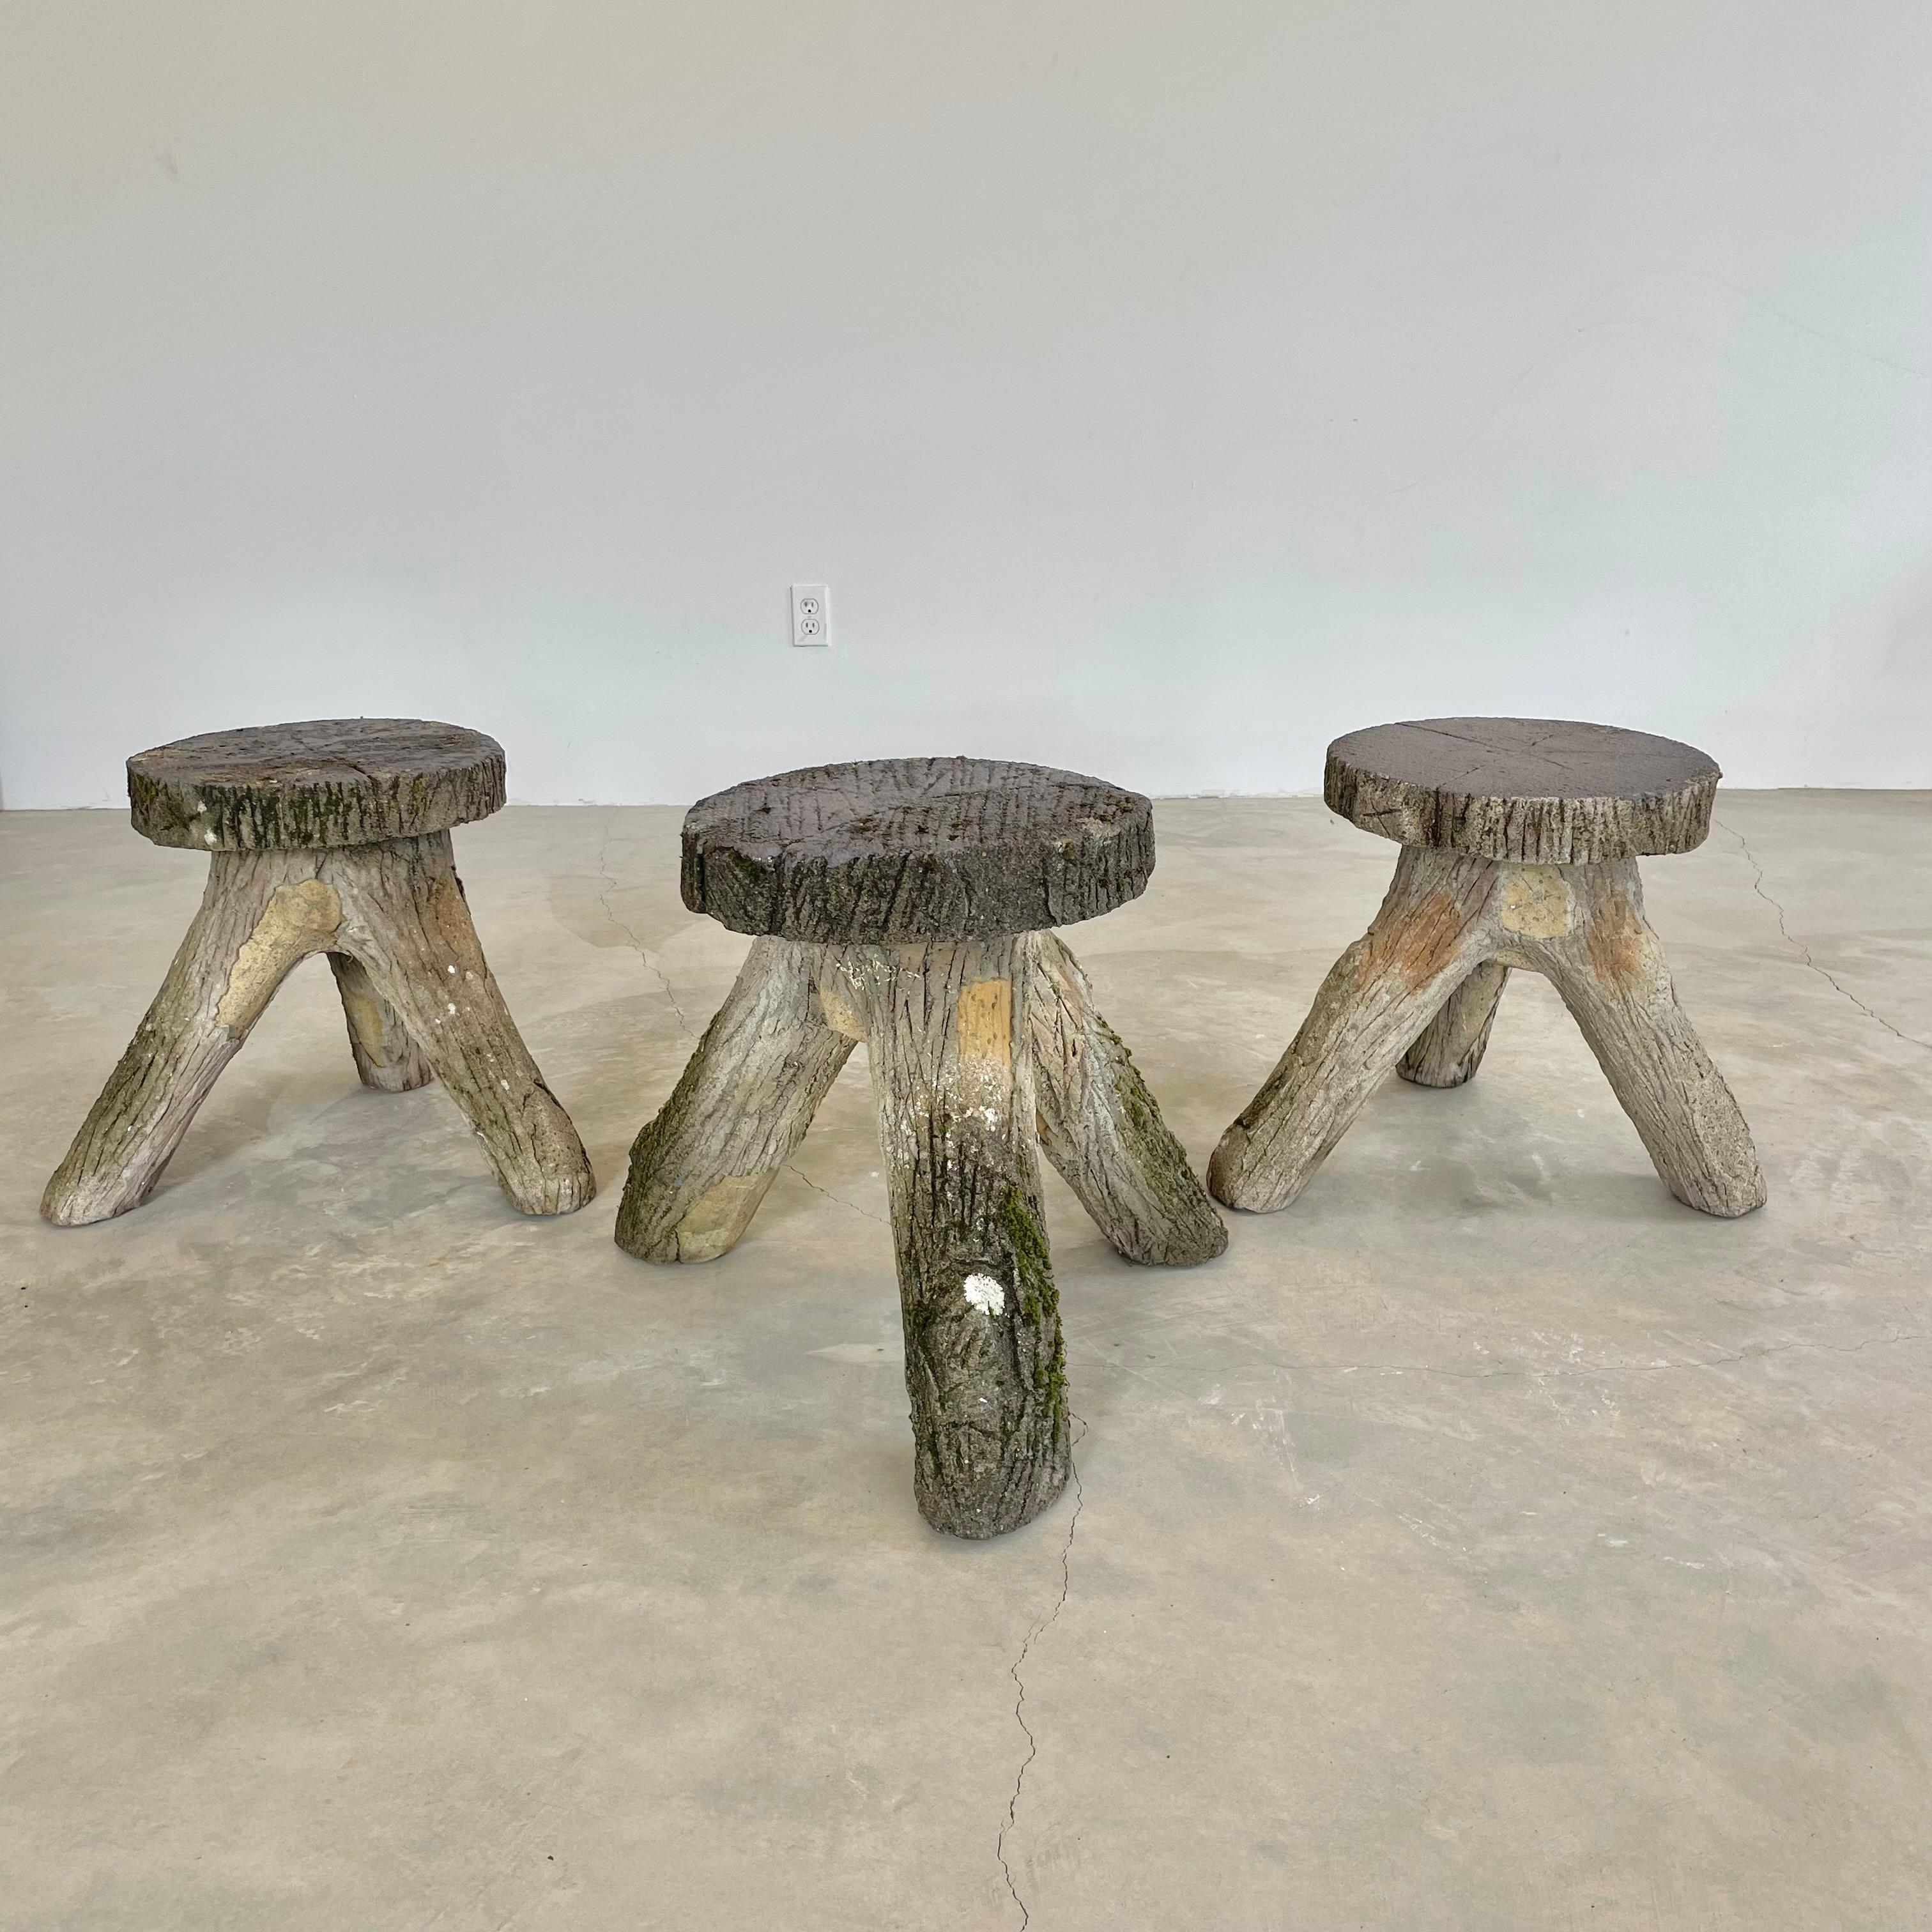 Stunning concrete faux-bois tripod stools, circa 1970s. Detailed design including realistic bark to knots and wood grain can be seen throughout each stool. Years of patina and weathering gives each piece in the set a stunningly unique look. As these